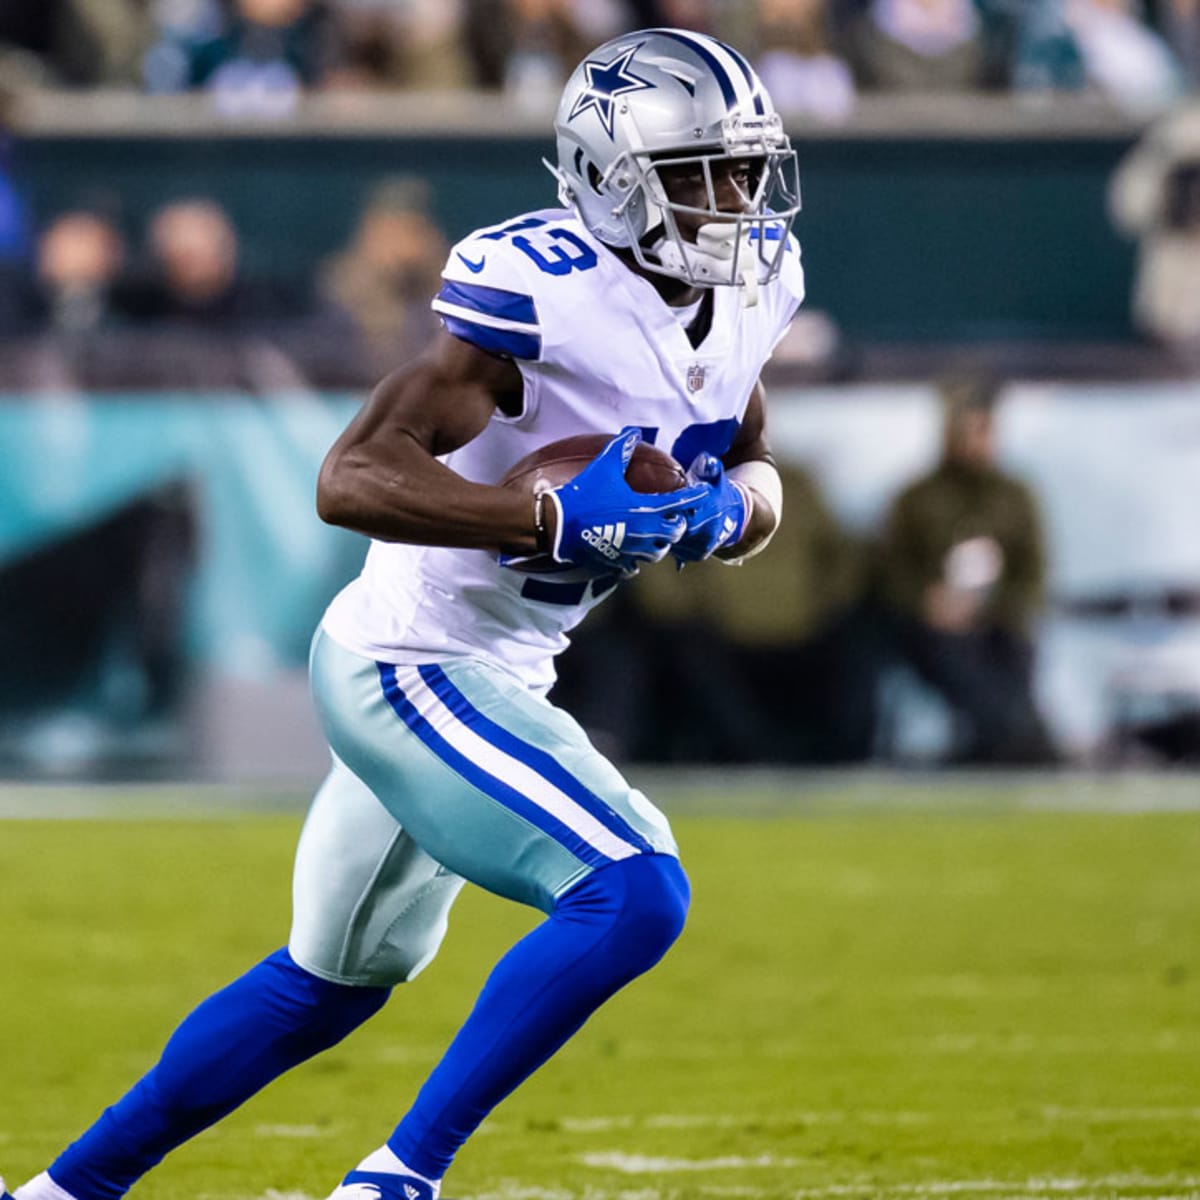 Cowboys WR Michael Gallup to play vs. Redskins after brother's